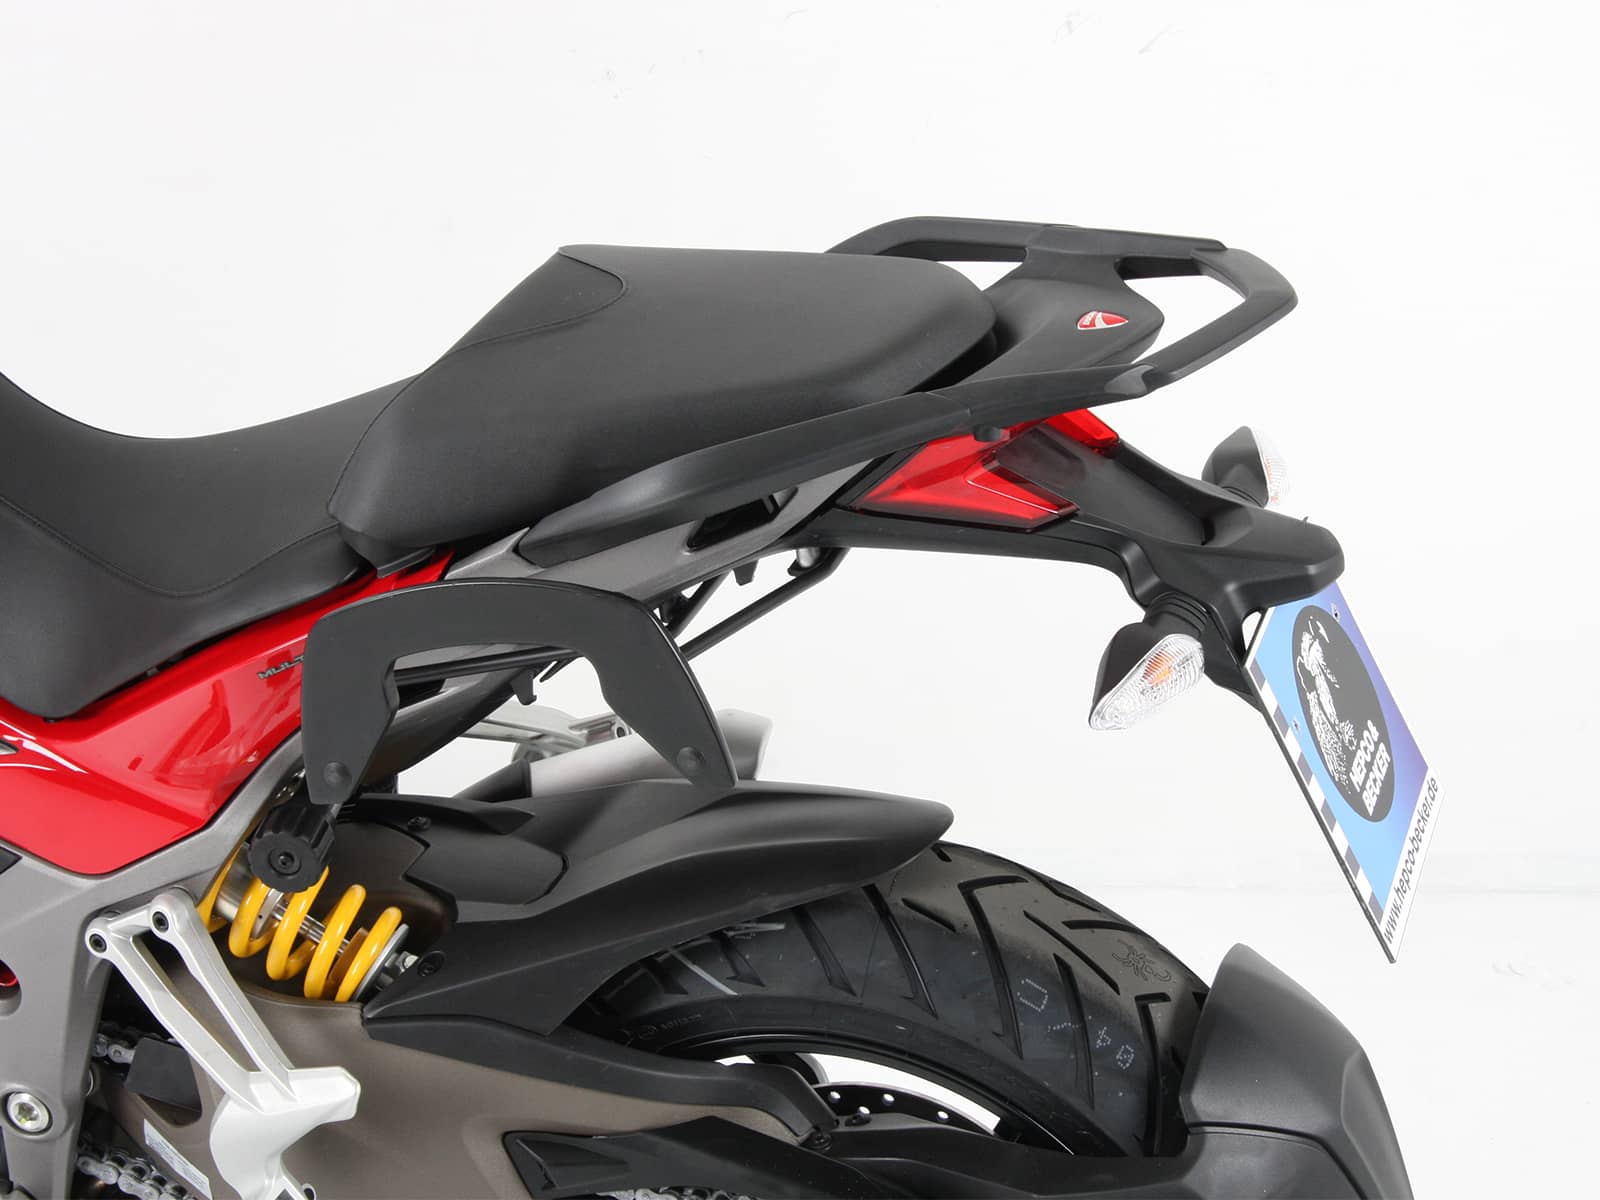 C-Bow sidecarrier for Ducati Multistrada 1260/S (2018-)